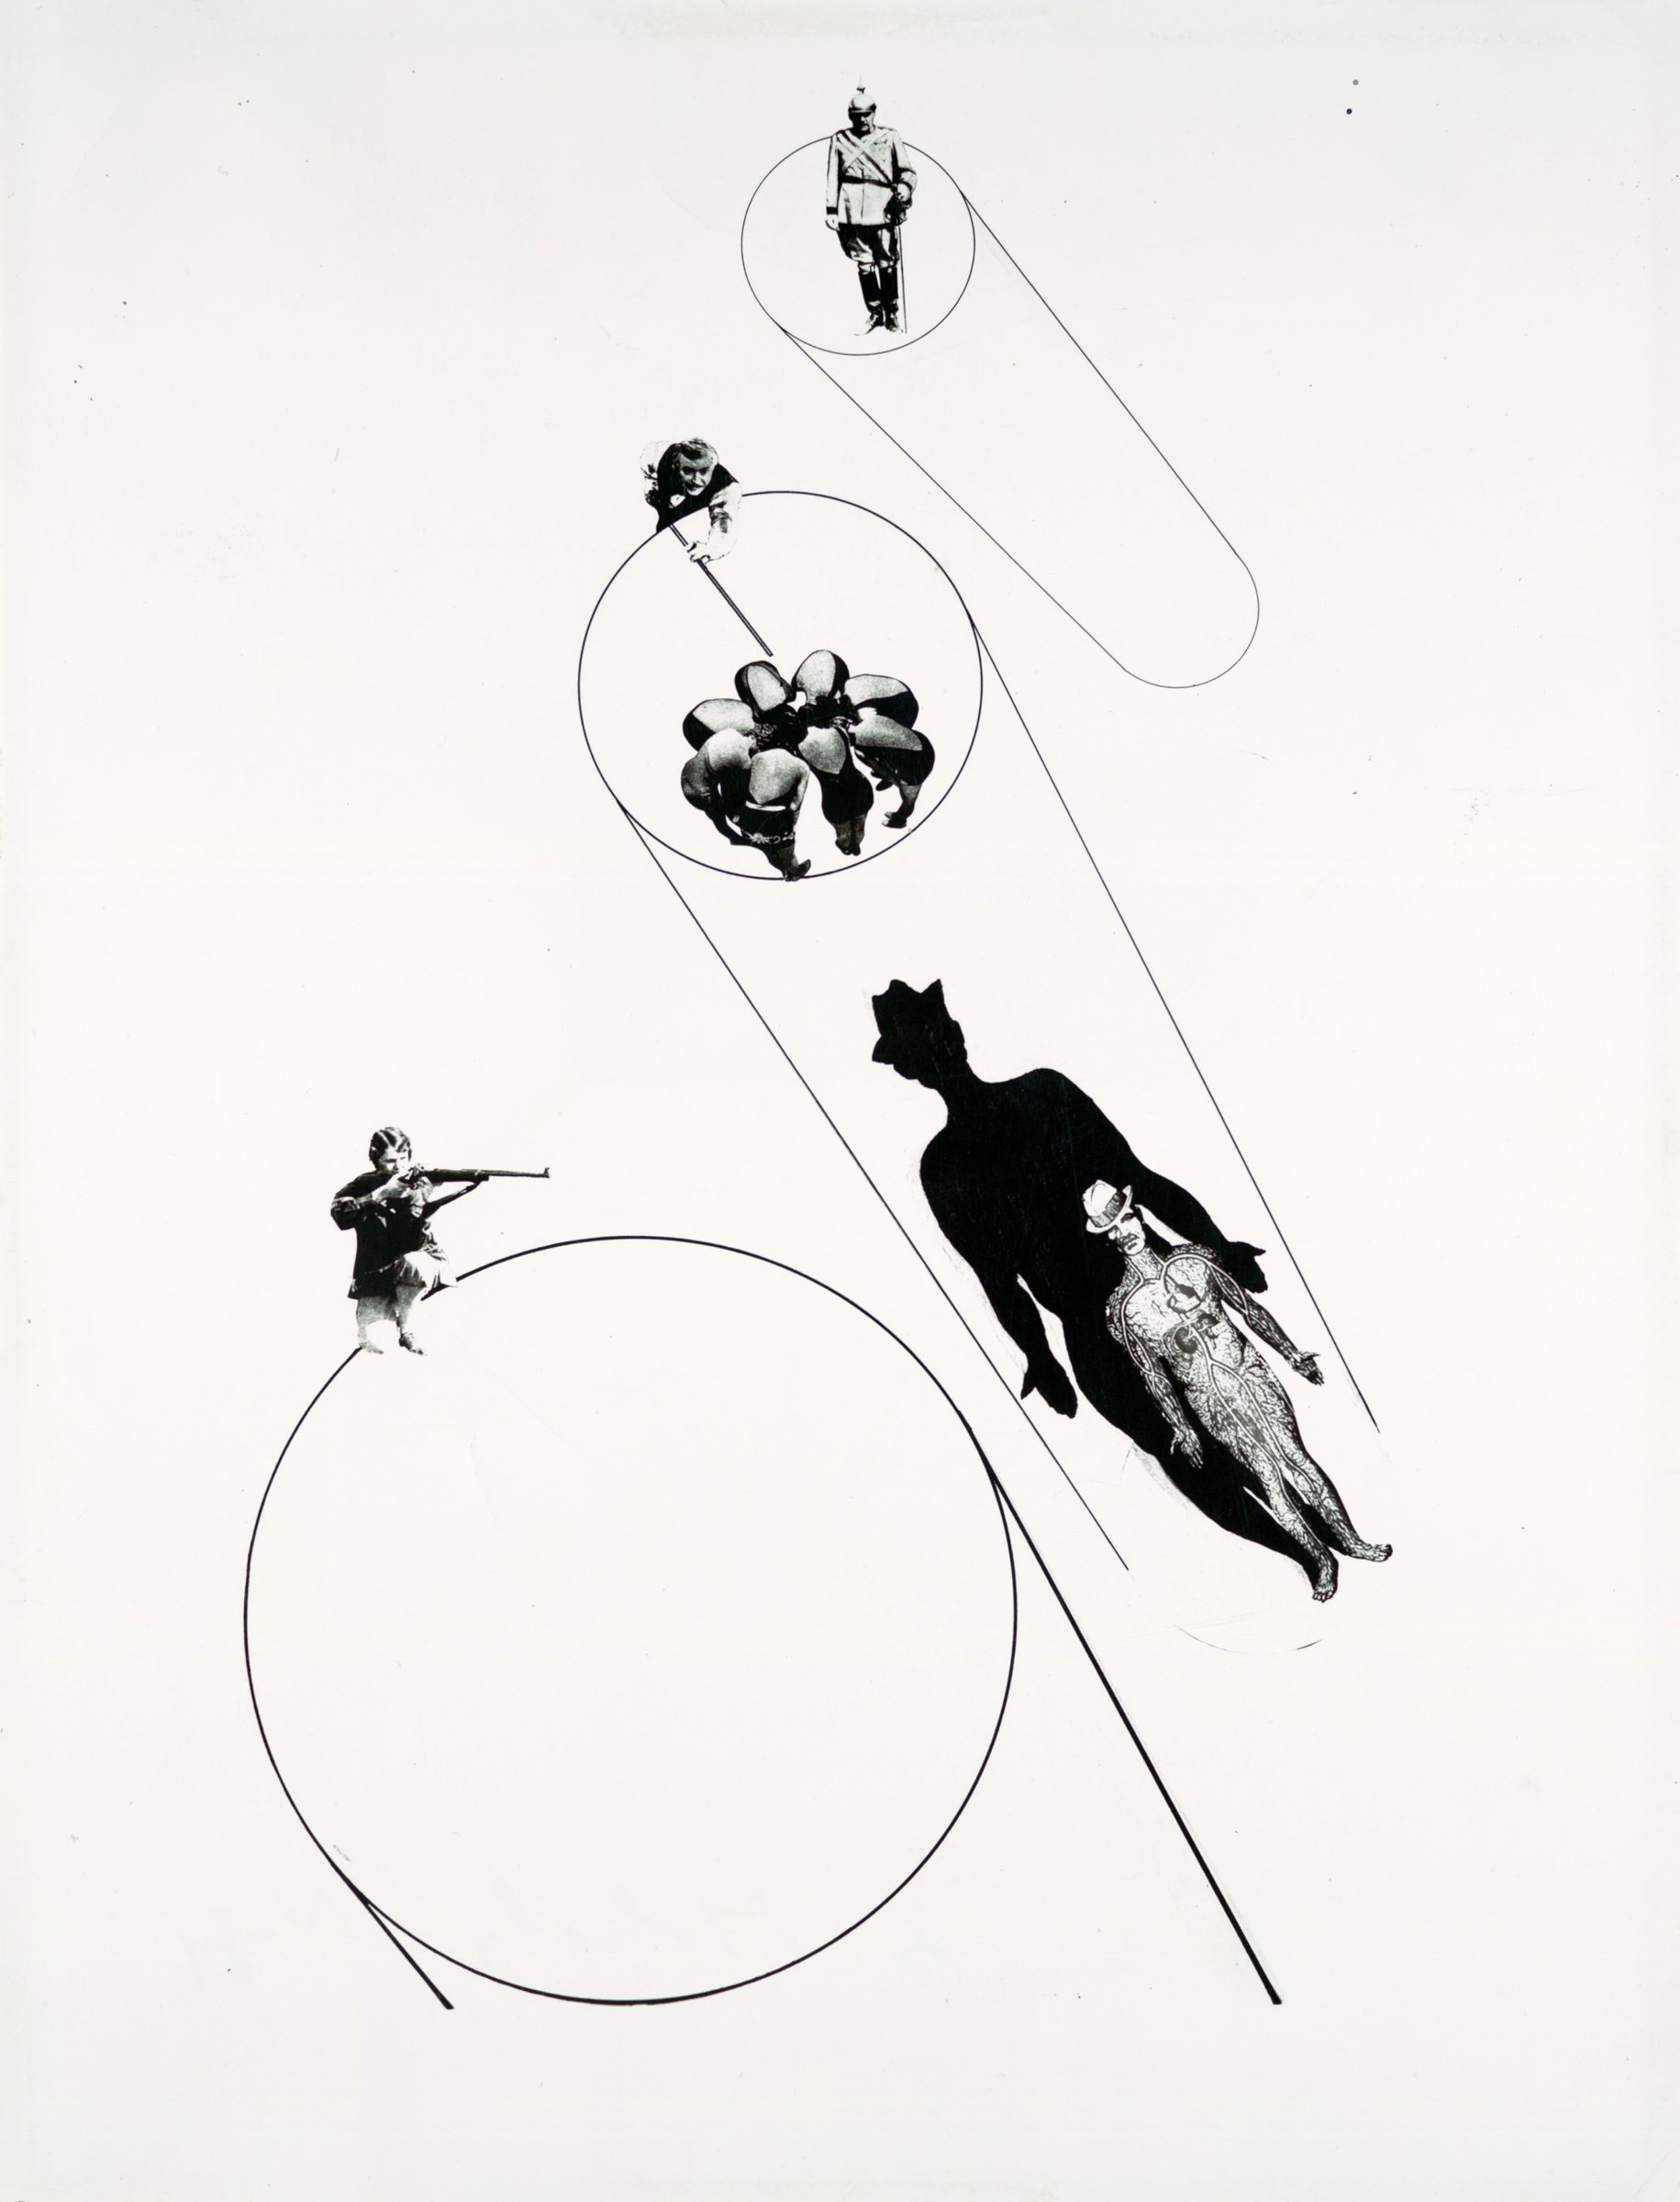 Target Practice (In the Name of the Law), by László Moholy-Nagy | Source: The Met | License: CC0